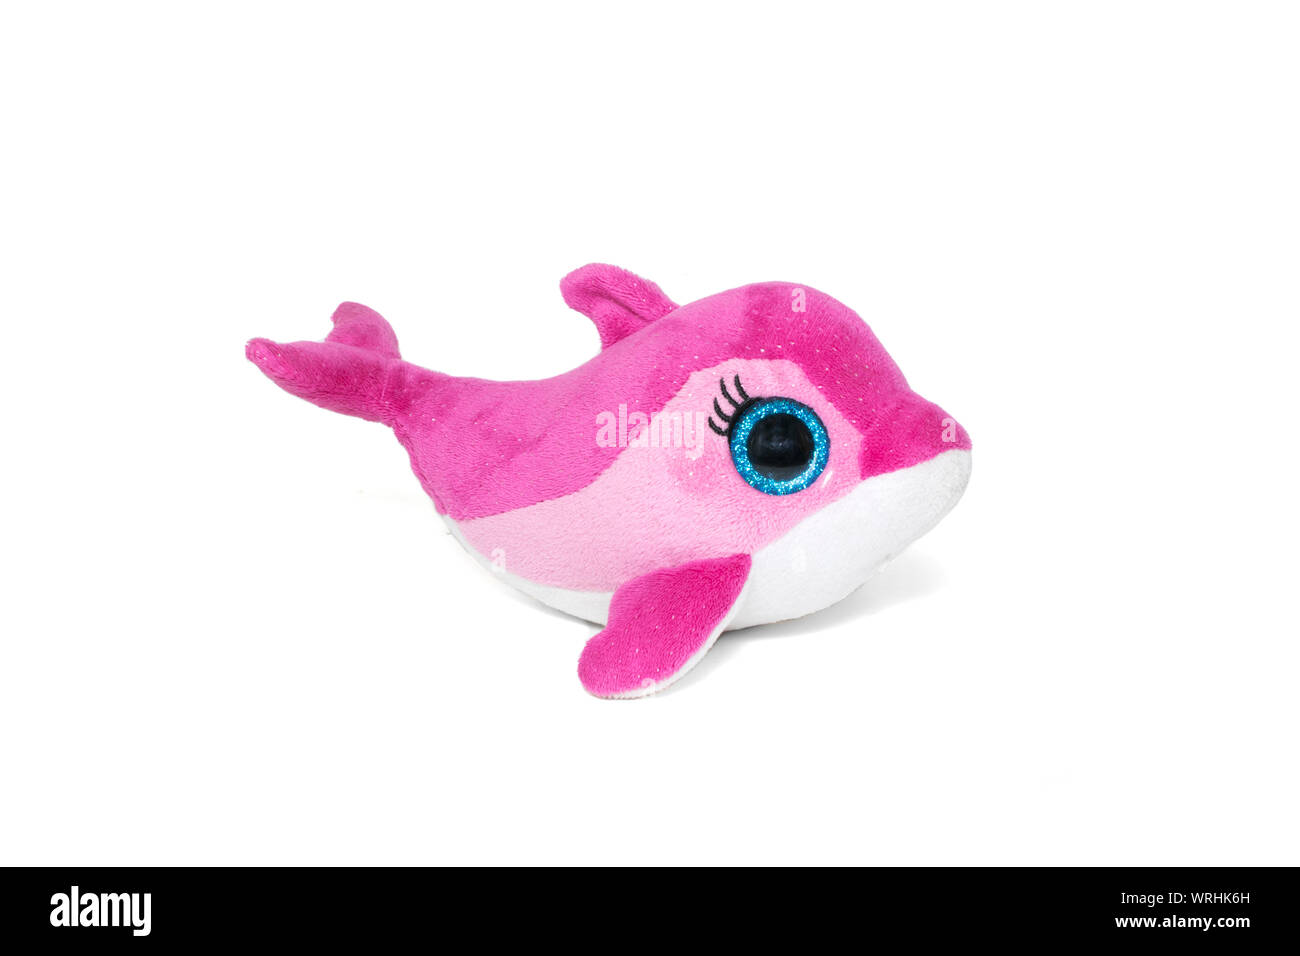 Pink dolphin toy isolated on white background. Stock Photo